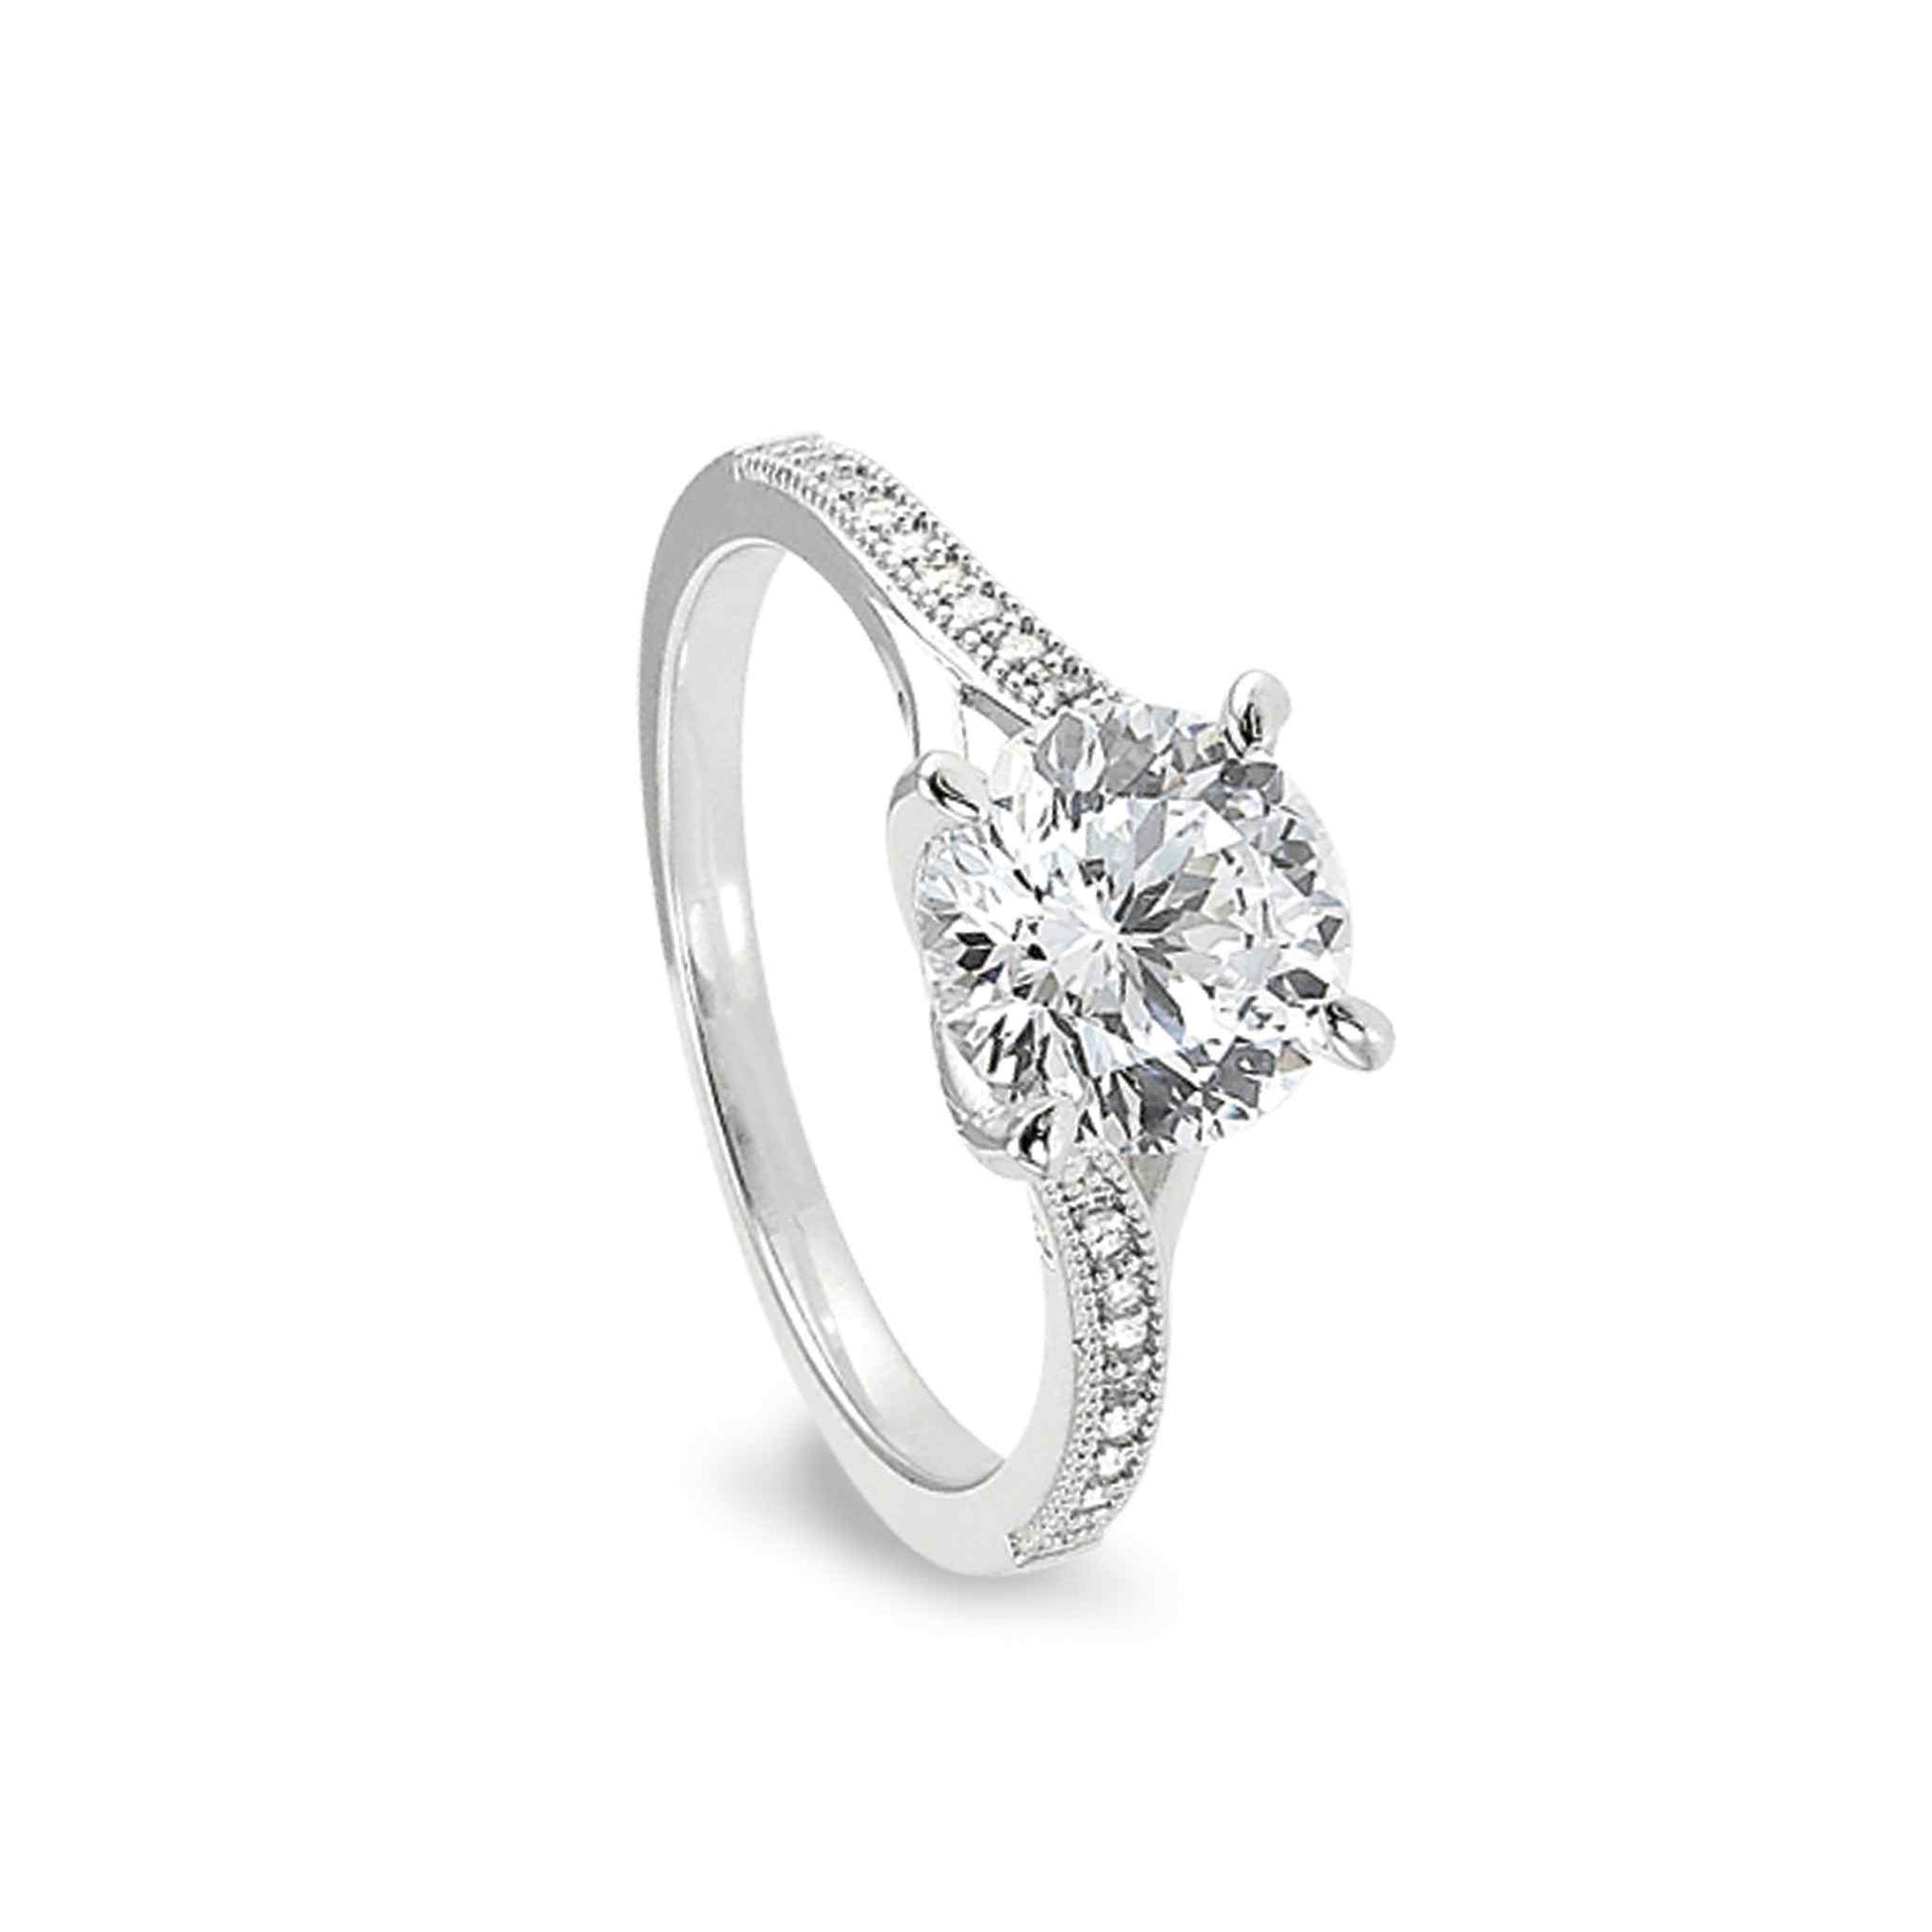 A split band engagement ring with 100 facet simulated diamond displayed on a neutral white background.